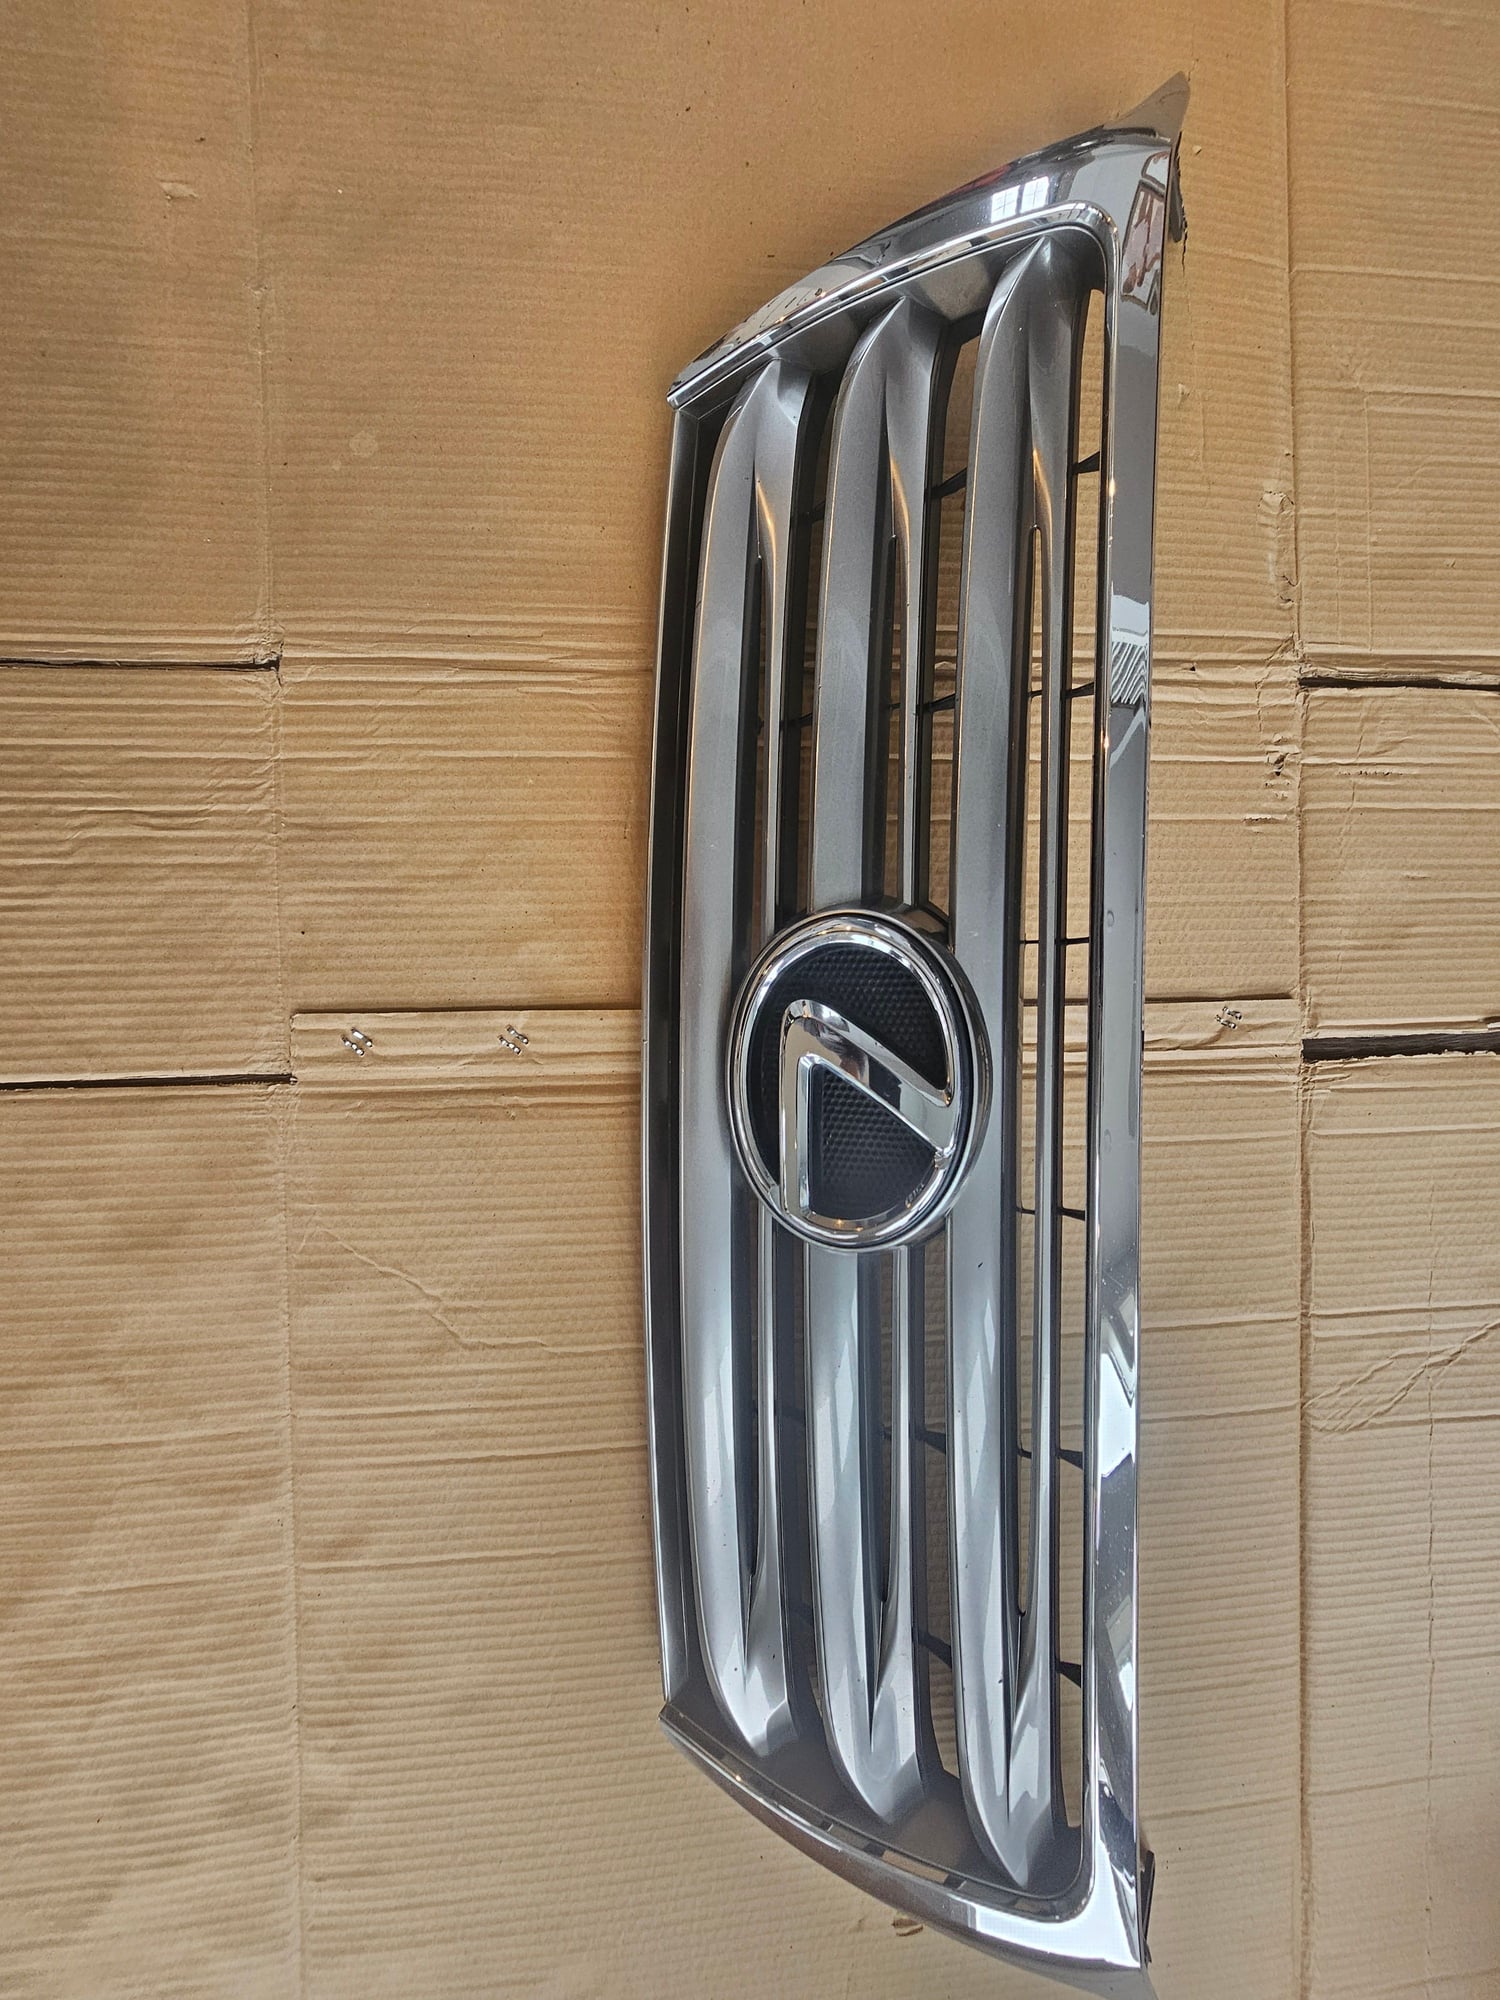 Exterior Body Parts - Grille 2012 gx460 - Used - 2010 to 2013 Lexus GX460 - Allendale, MI 49401, United States